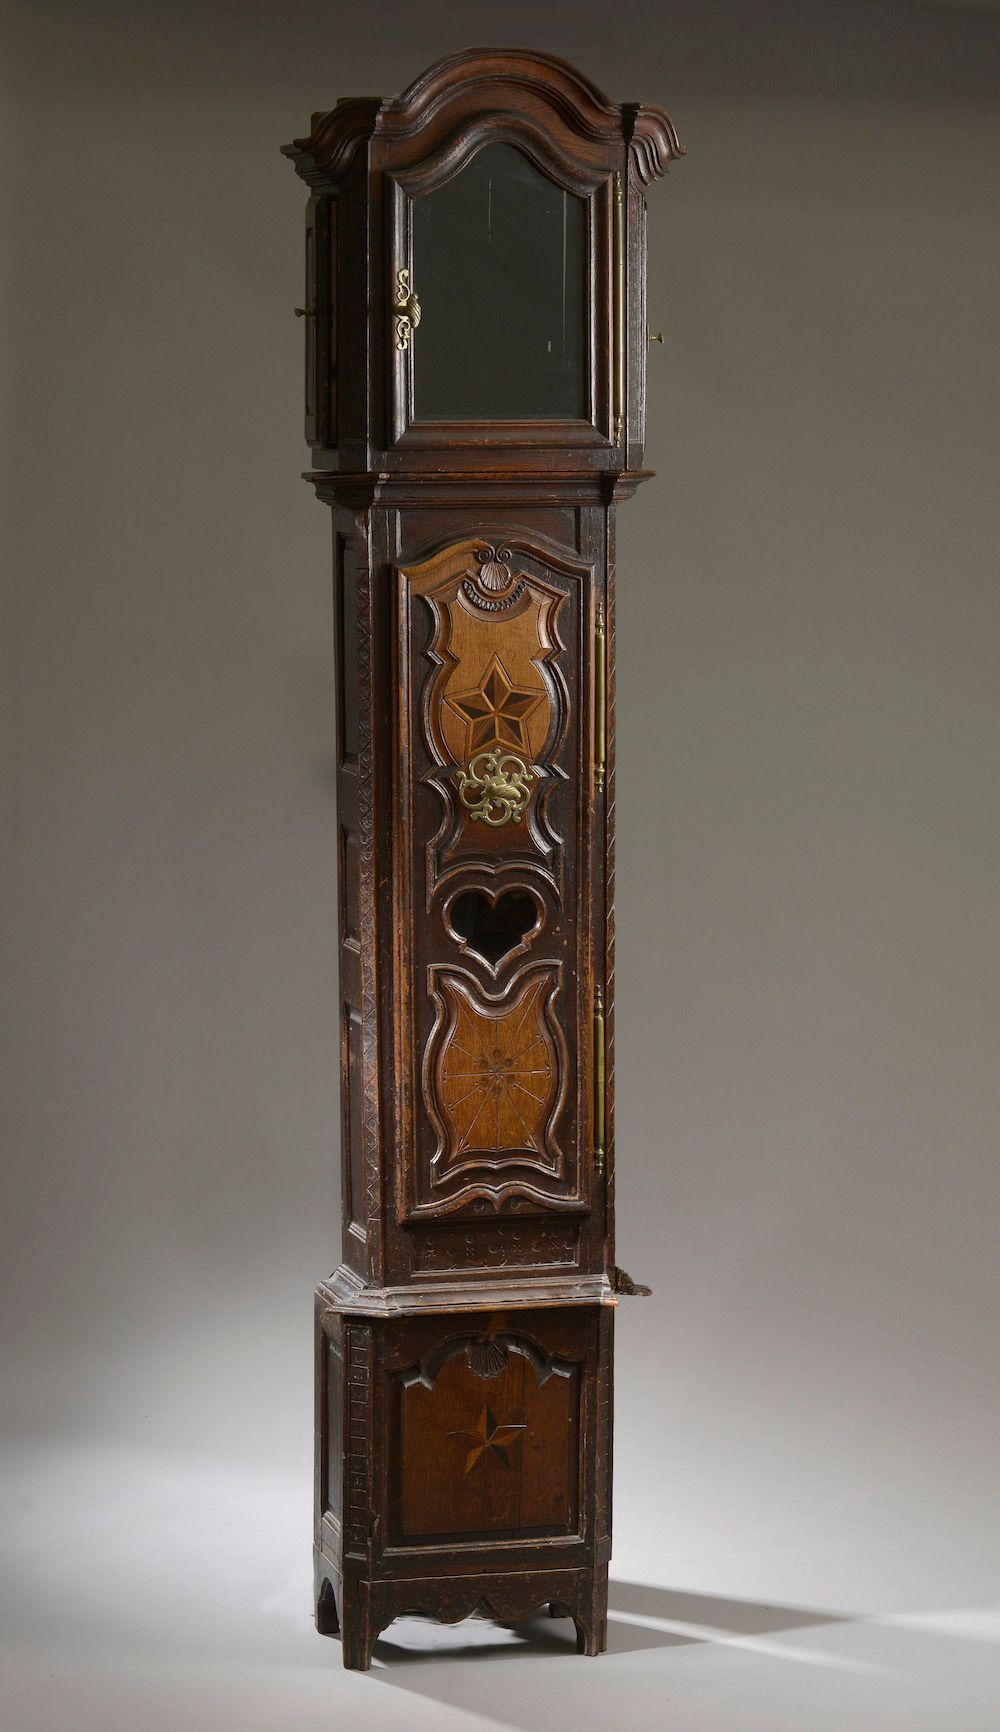 Null Oak and marquetry floor clock with large intermediate moldings (missing).

&hellip;